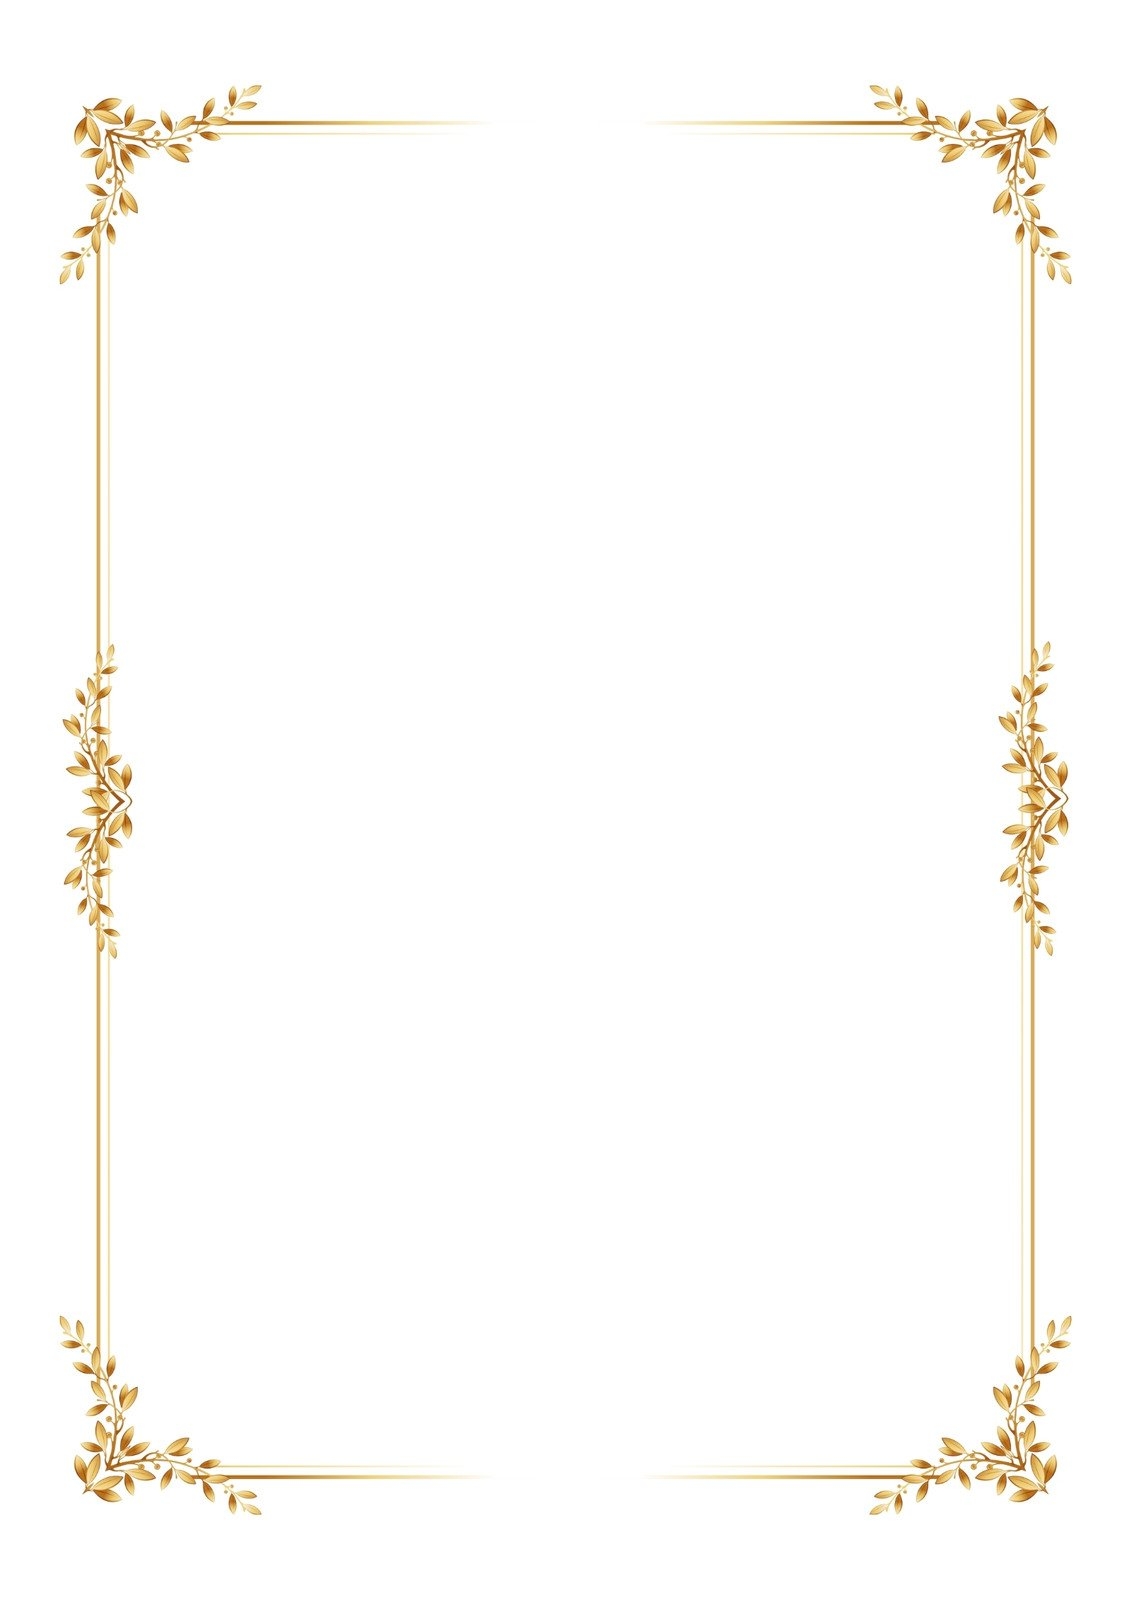 Free Printable Page Border Templates You Can Customize Canva - Free Printable Borders and Frames